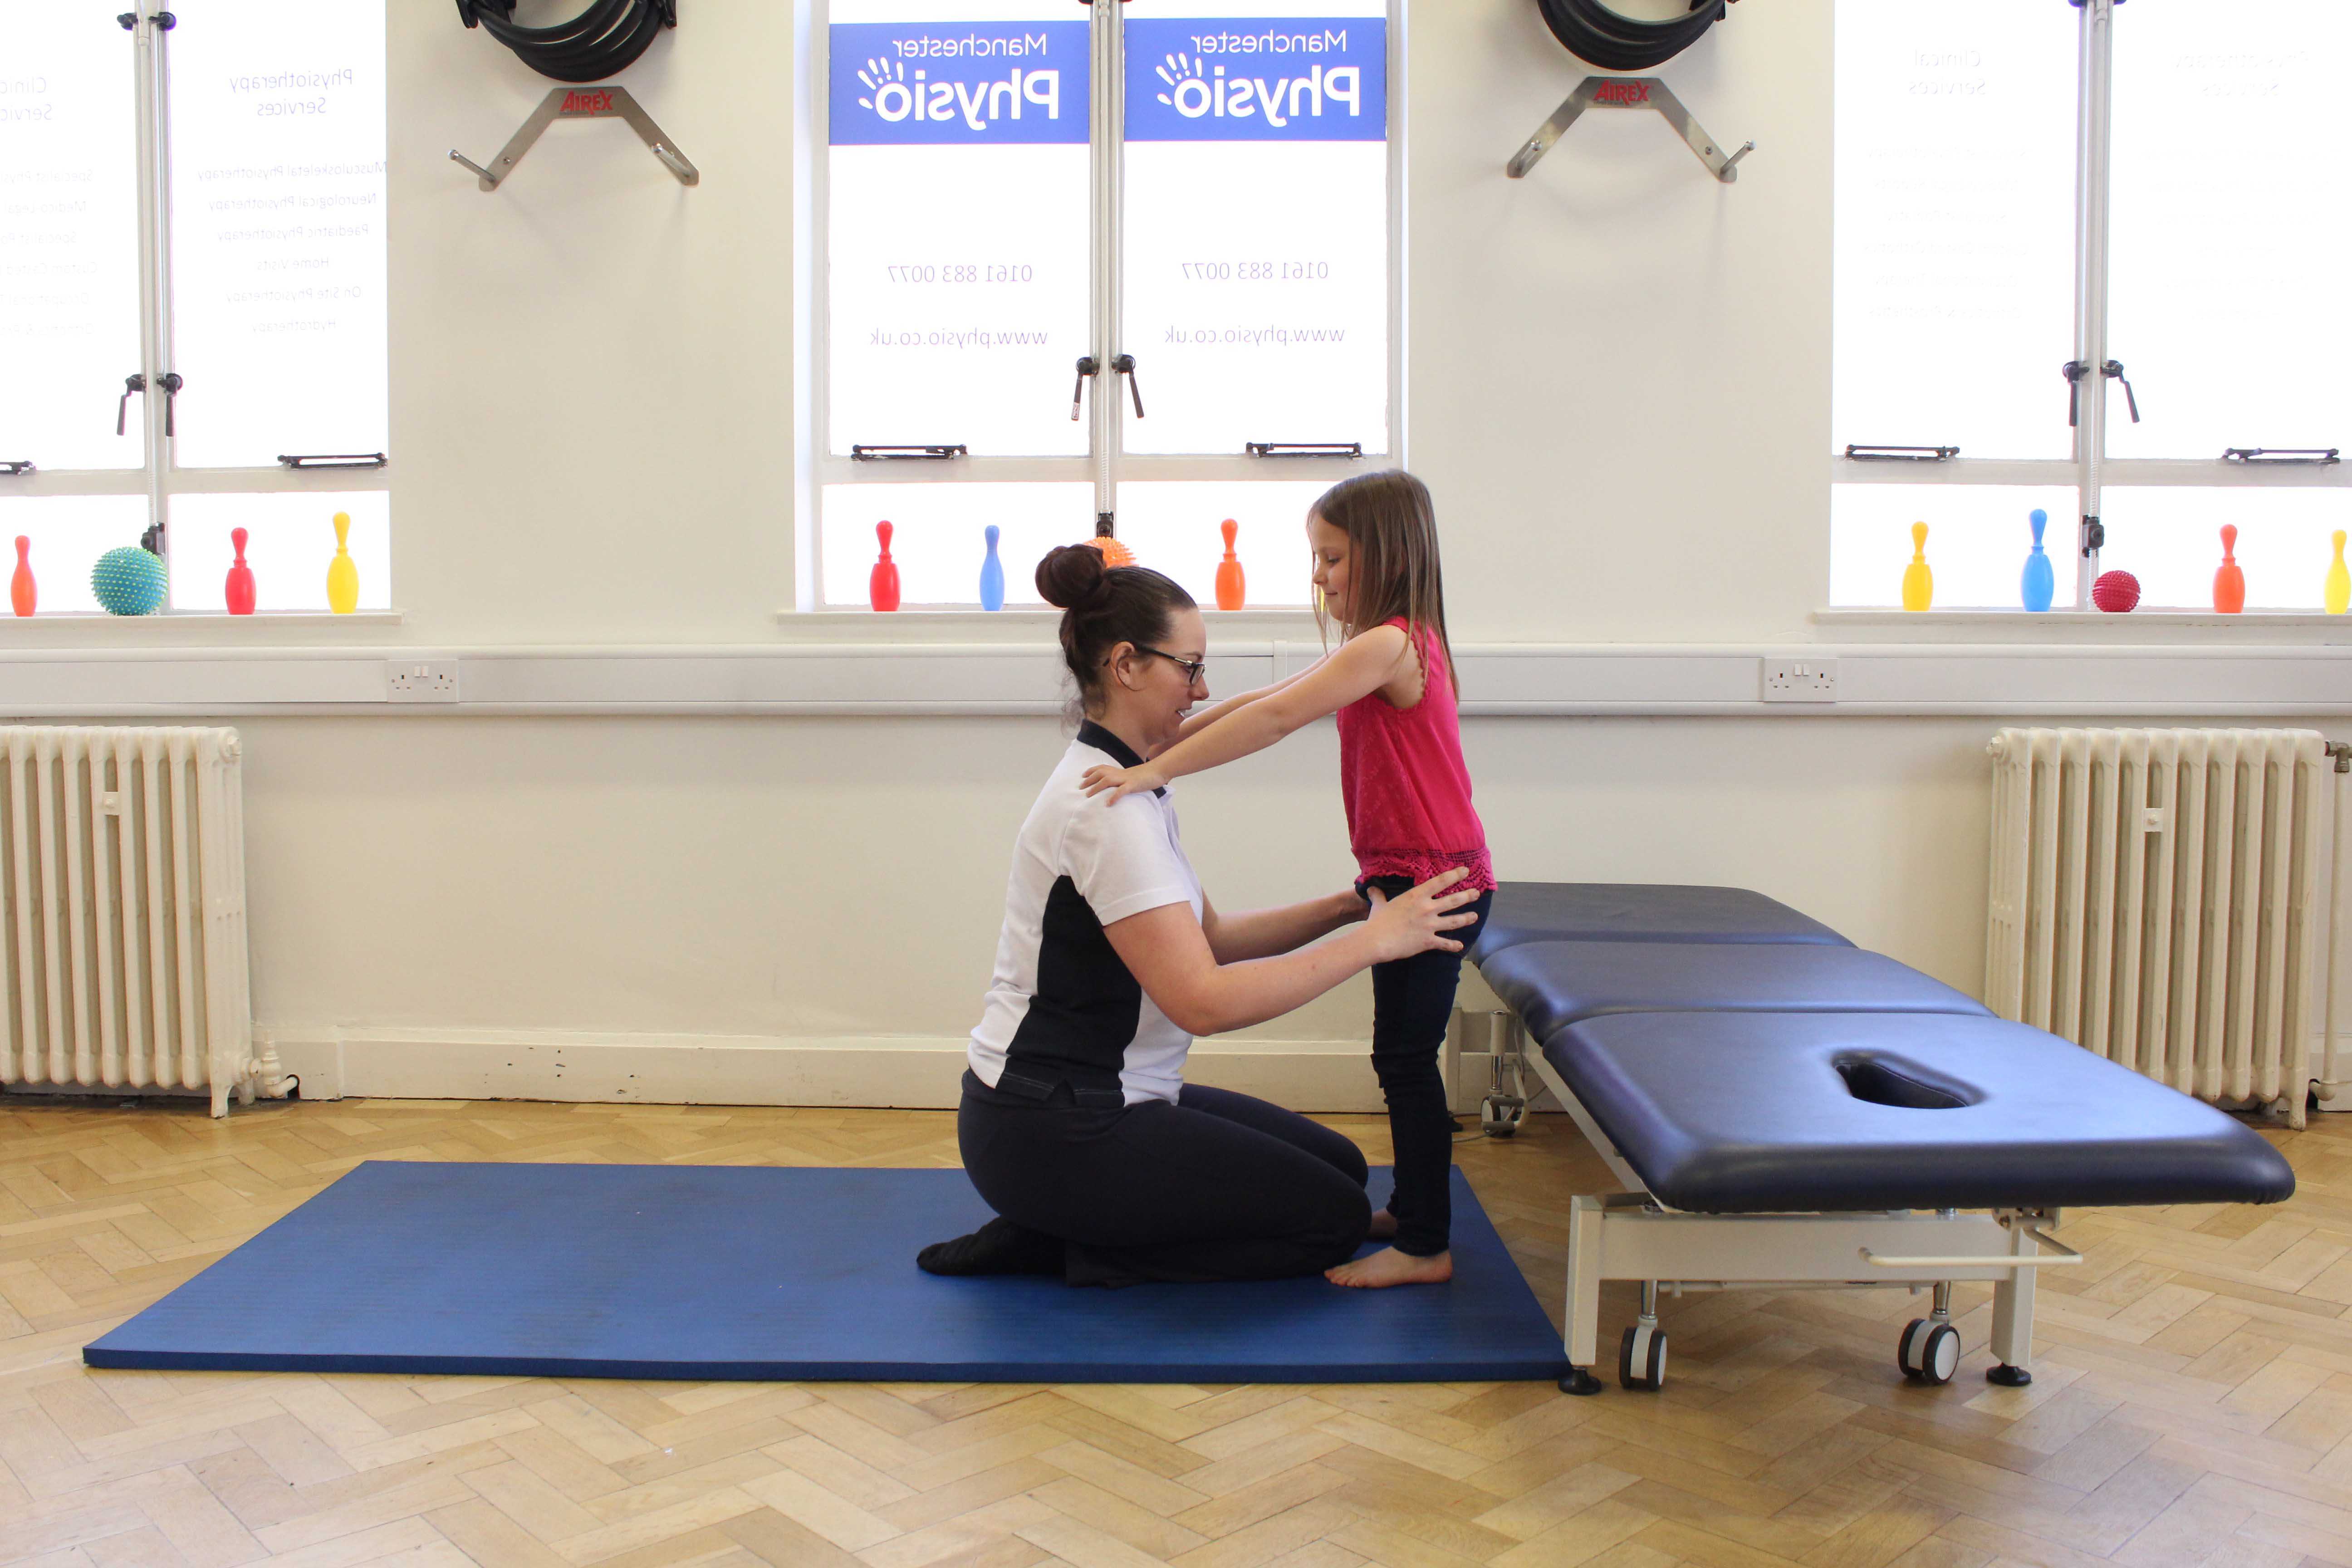 Paediatric physiotherapist using play activities to improve functional ability